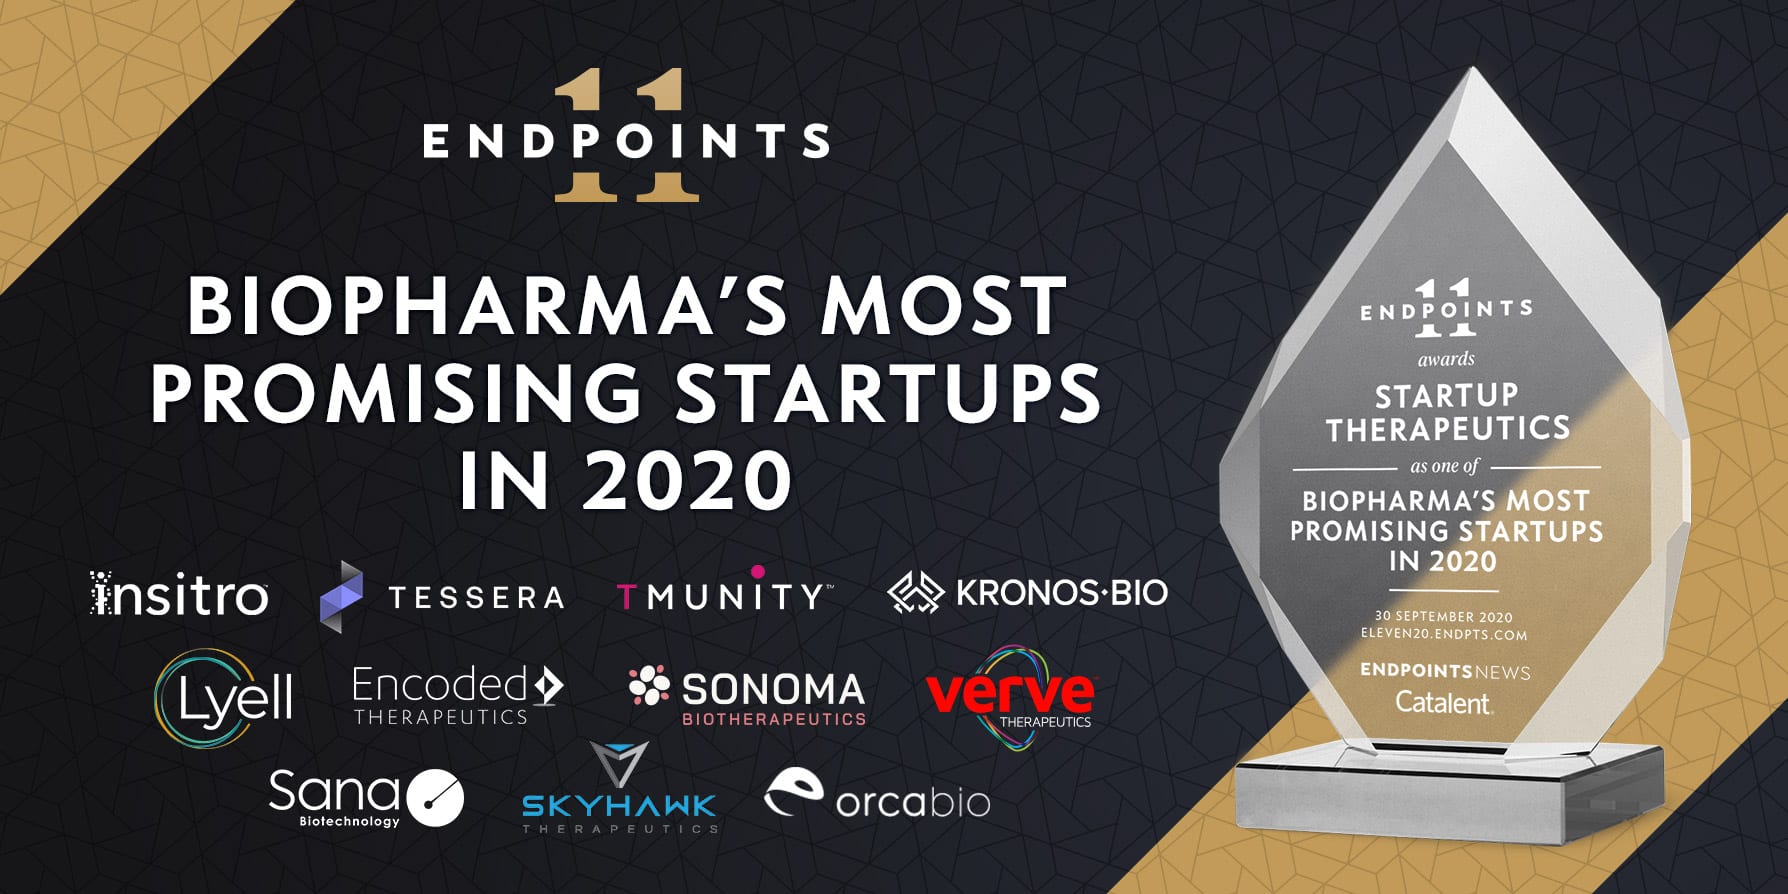 The Endpoints 11: Here are some of the most promising startups in biotech. And Covid-19 isn't going to stop them